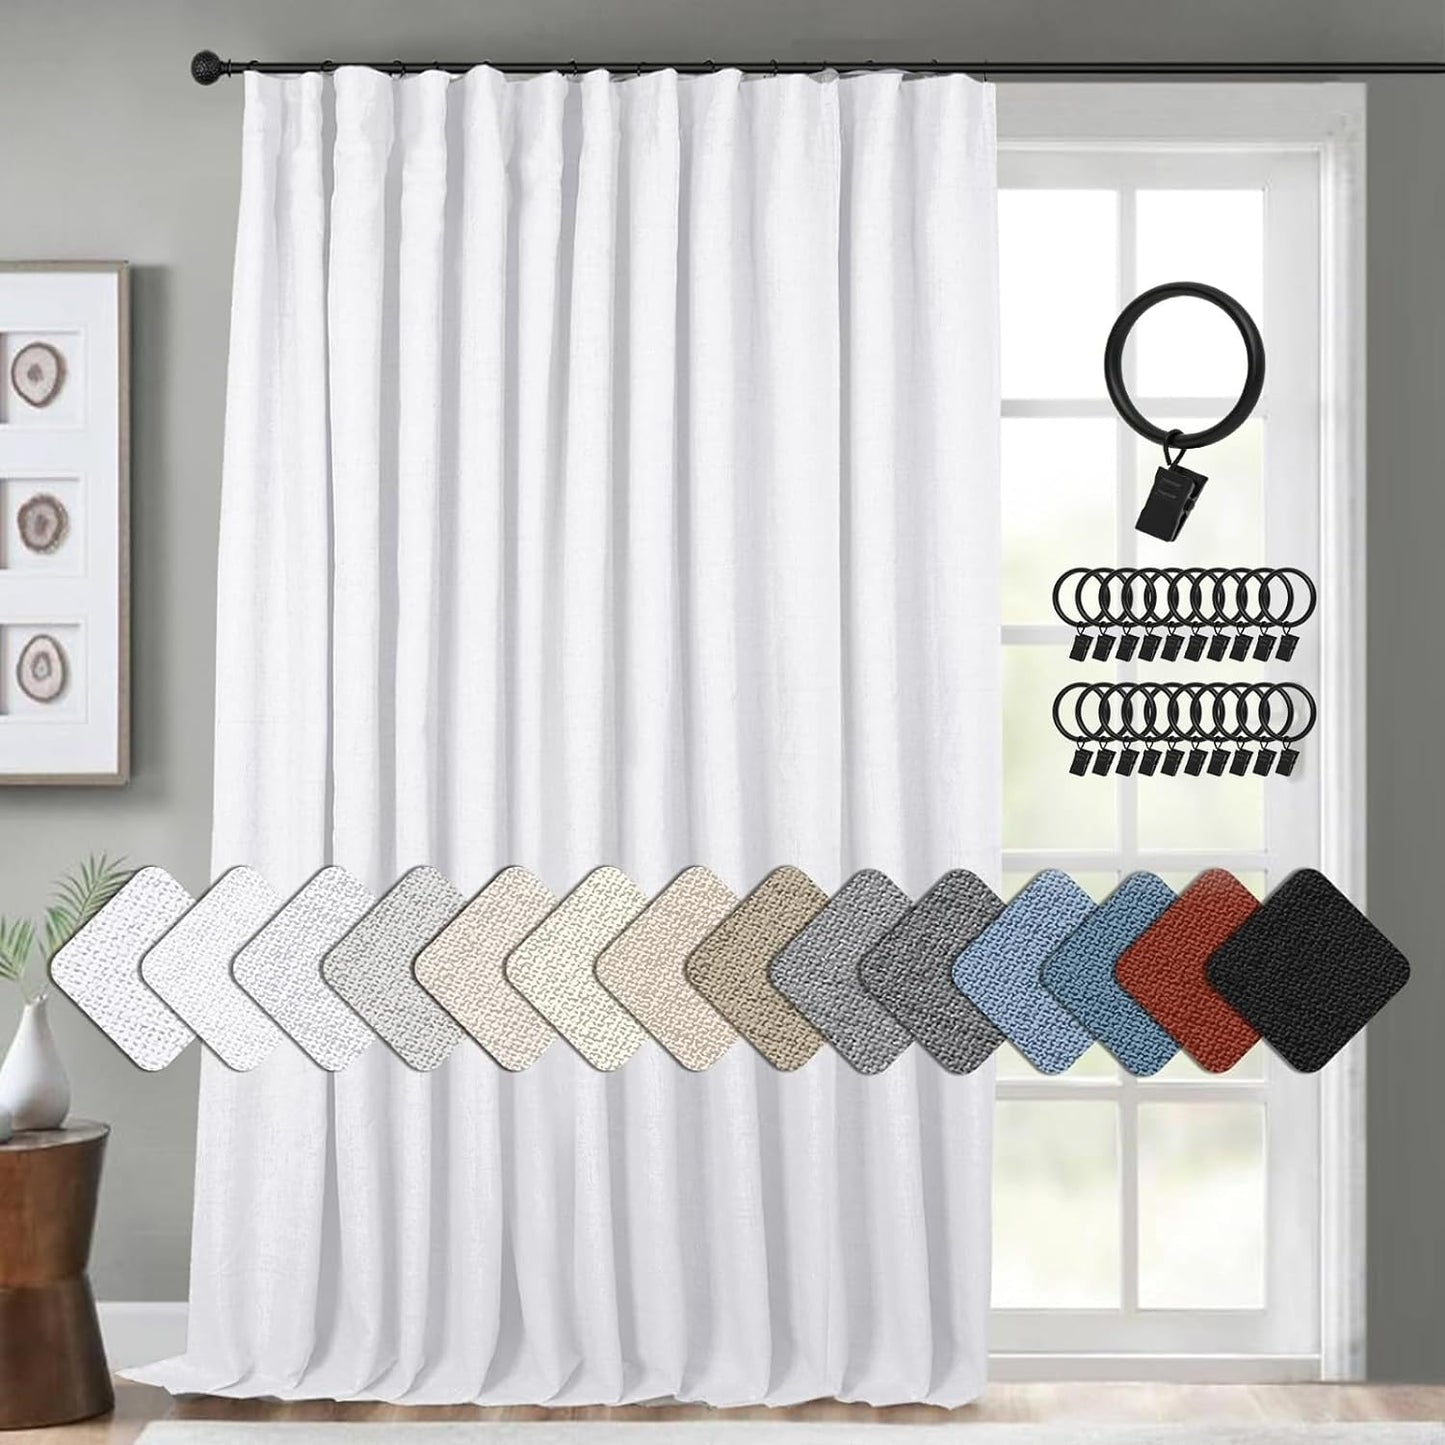 INOVADAY Linen Blackout Curtains 96 Inches Long, Thermal Insulated Black Out Curtains & Drapes for Living Room Bedroom (W50 X L96 1 Panels, Beige)  INOVADAY Bright White 100"W X 84"L 